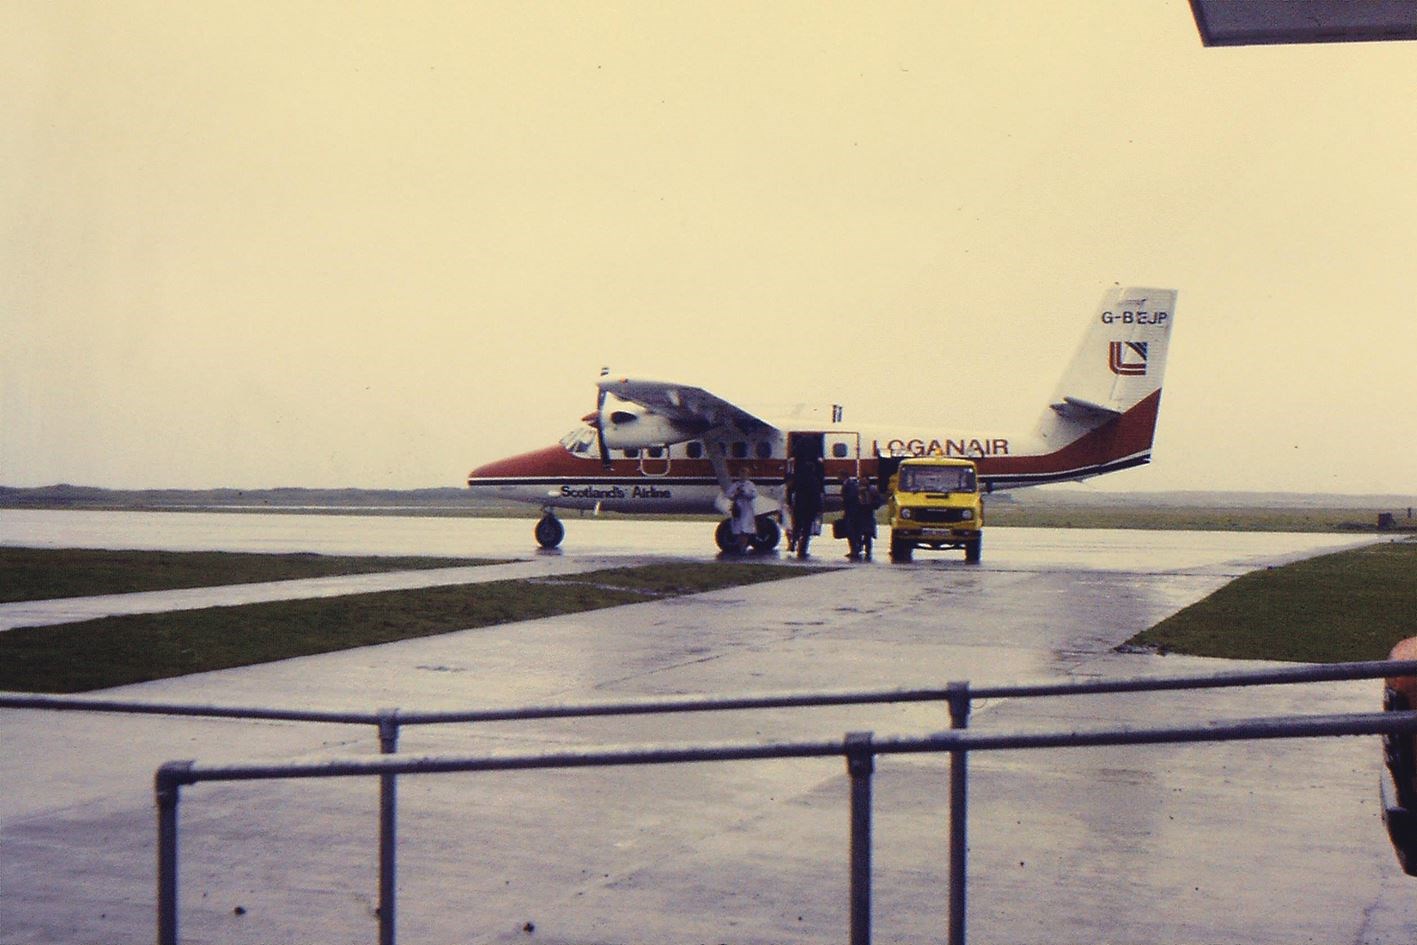 Loganair Twin Otter at Inverness airport in 1988, a step-up in capacity from the Britten Norman Islander aircraft used for many years on local routes in the Highlands and islands, and fondly nicknamed ‘the paraffin budgie.’